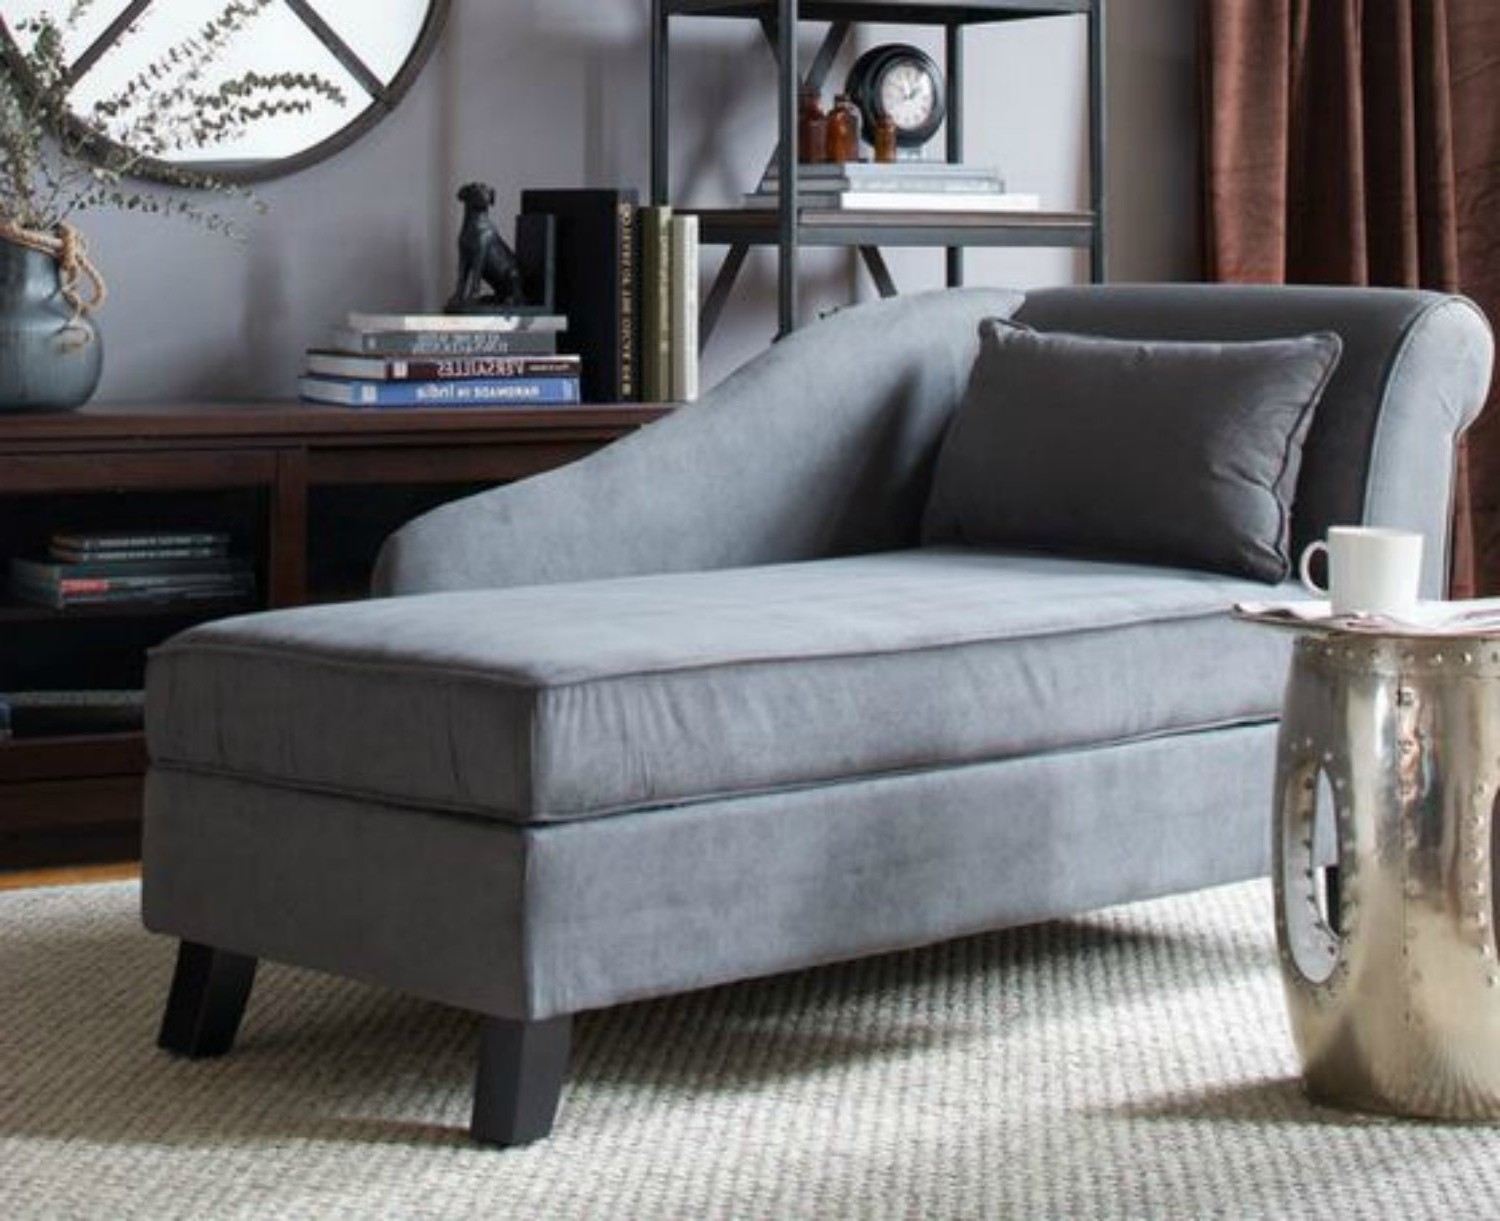 15 ideas of chaise lounges with storage 1